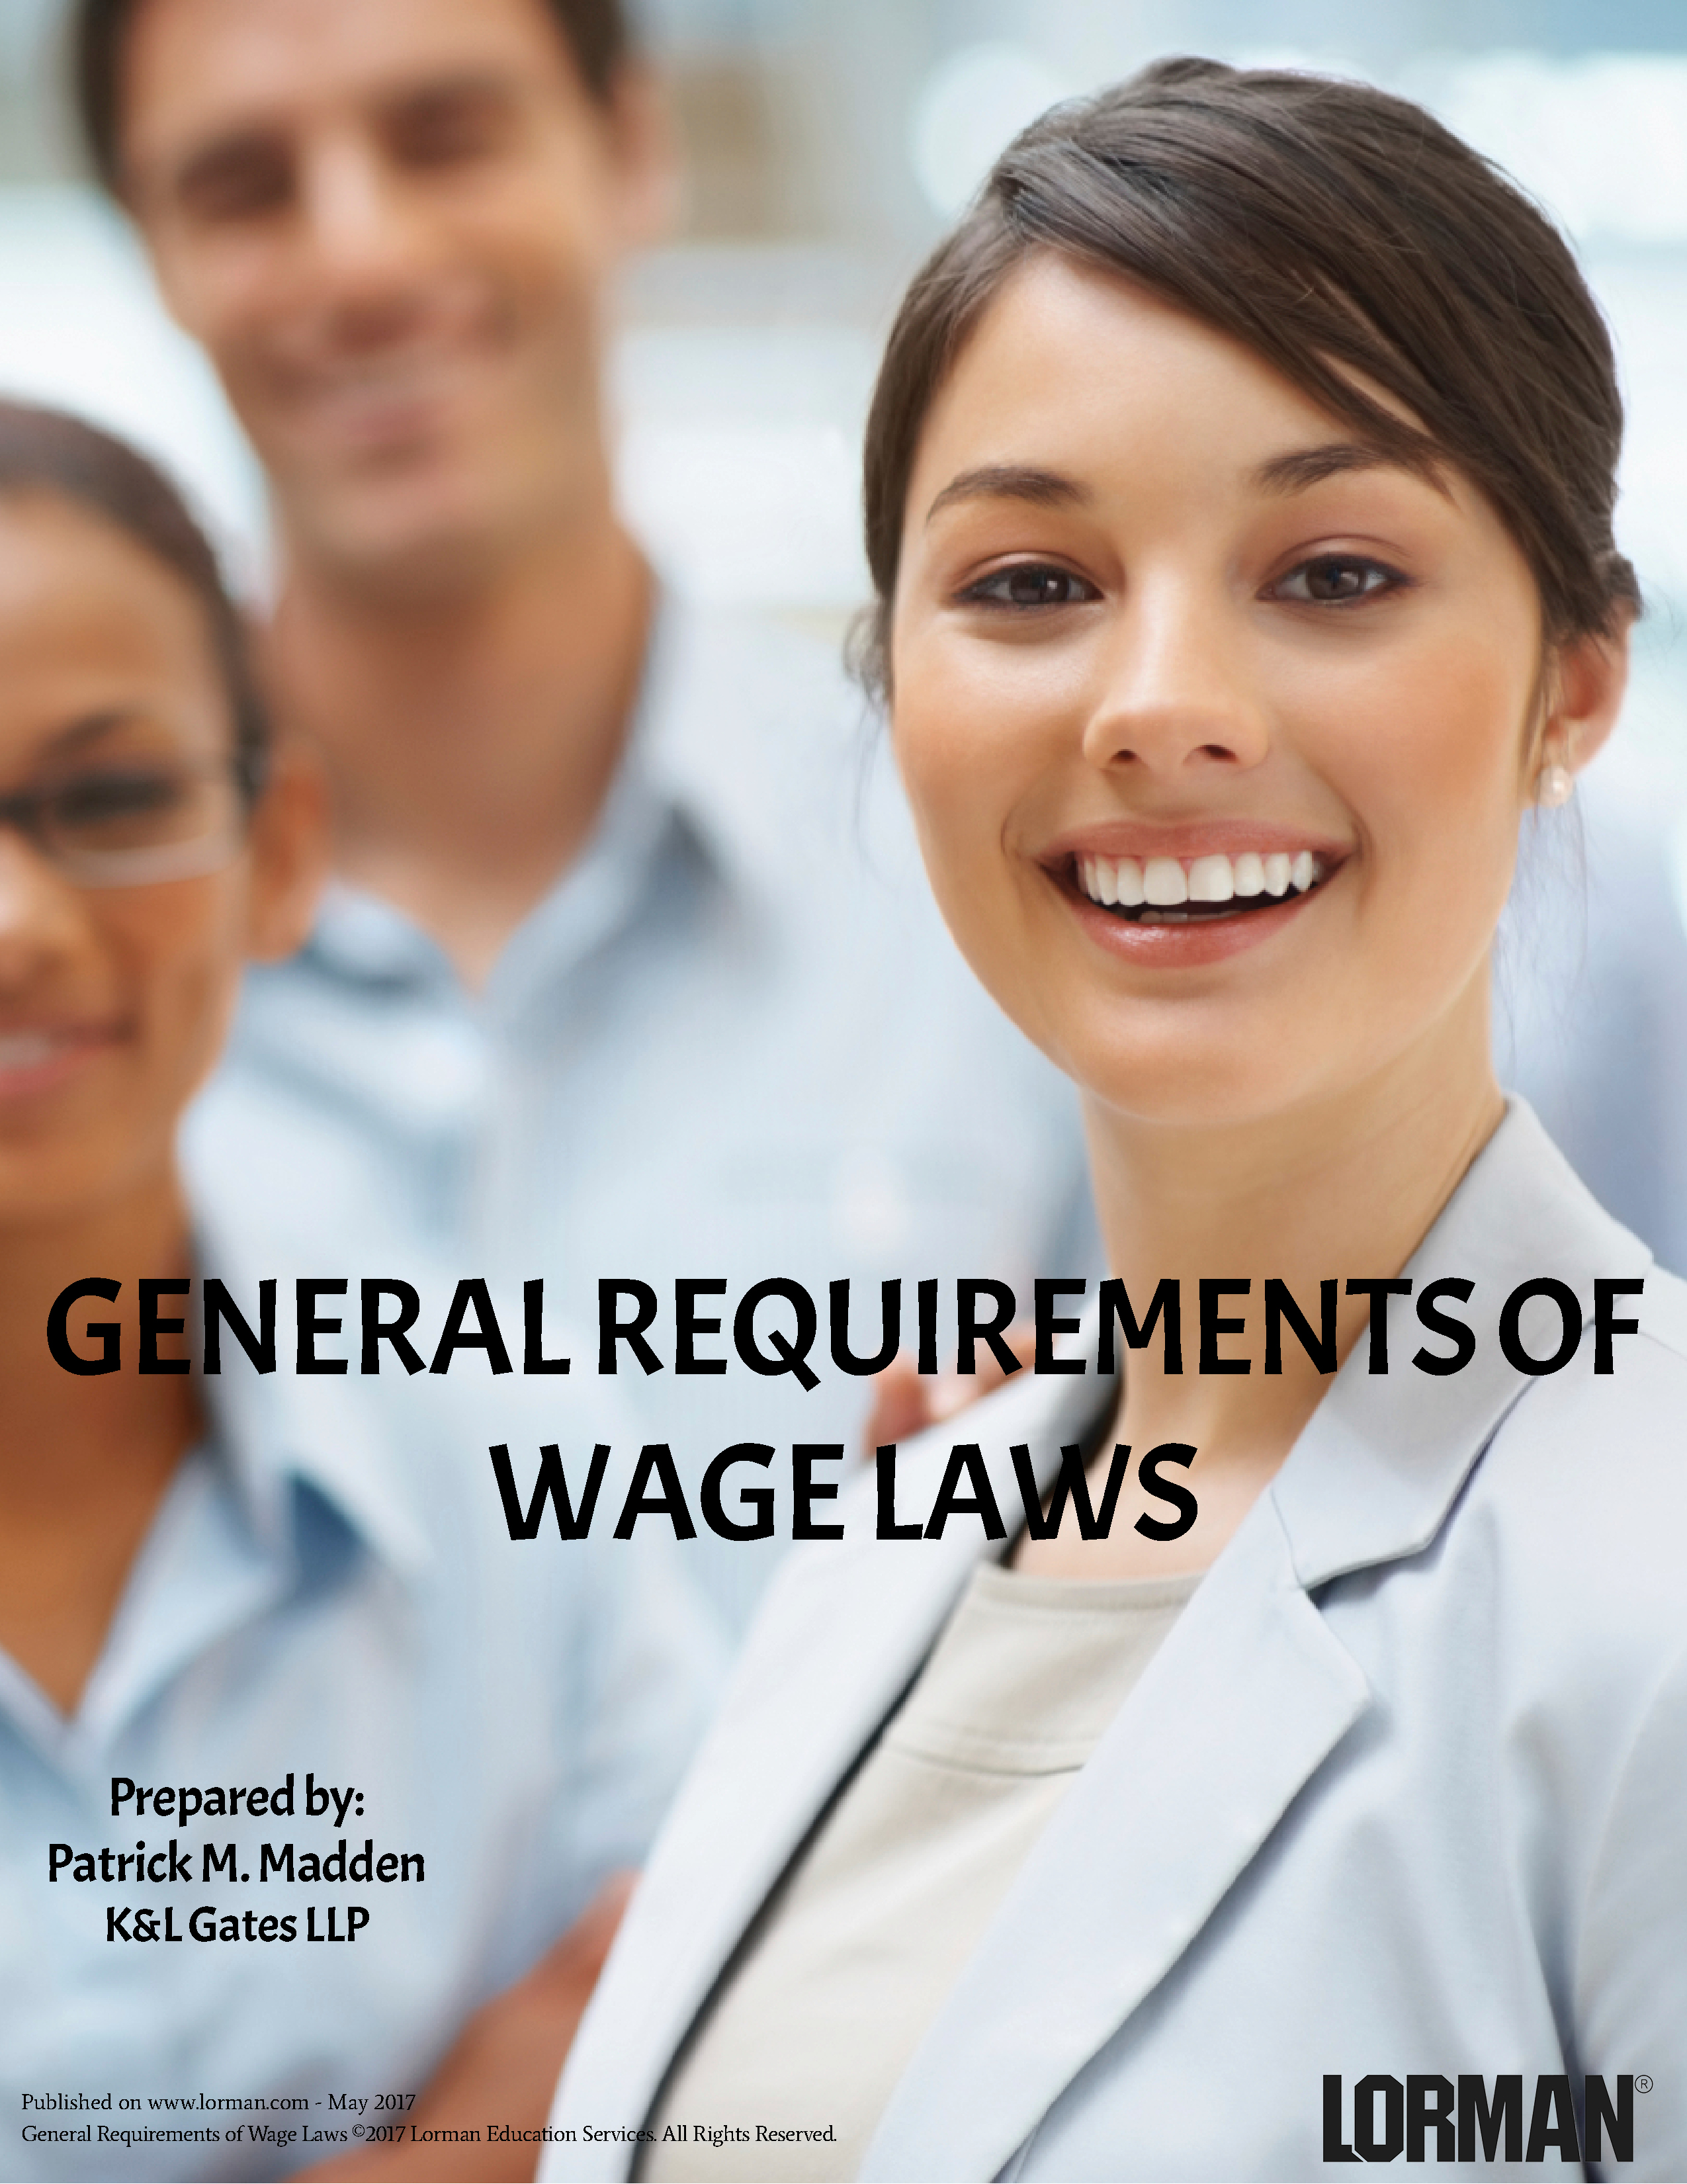 General Requirements of Wage Laws